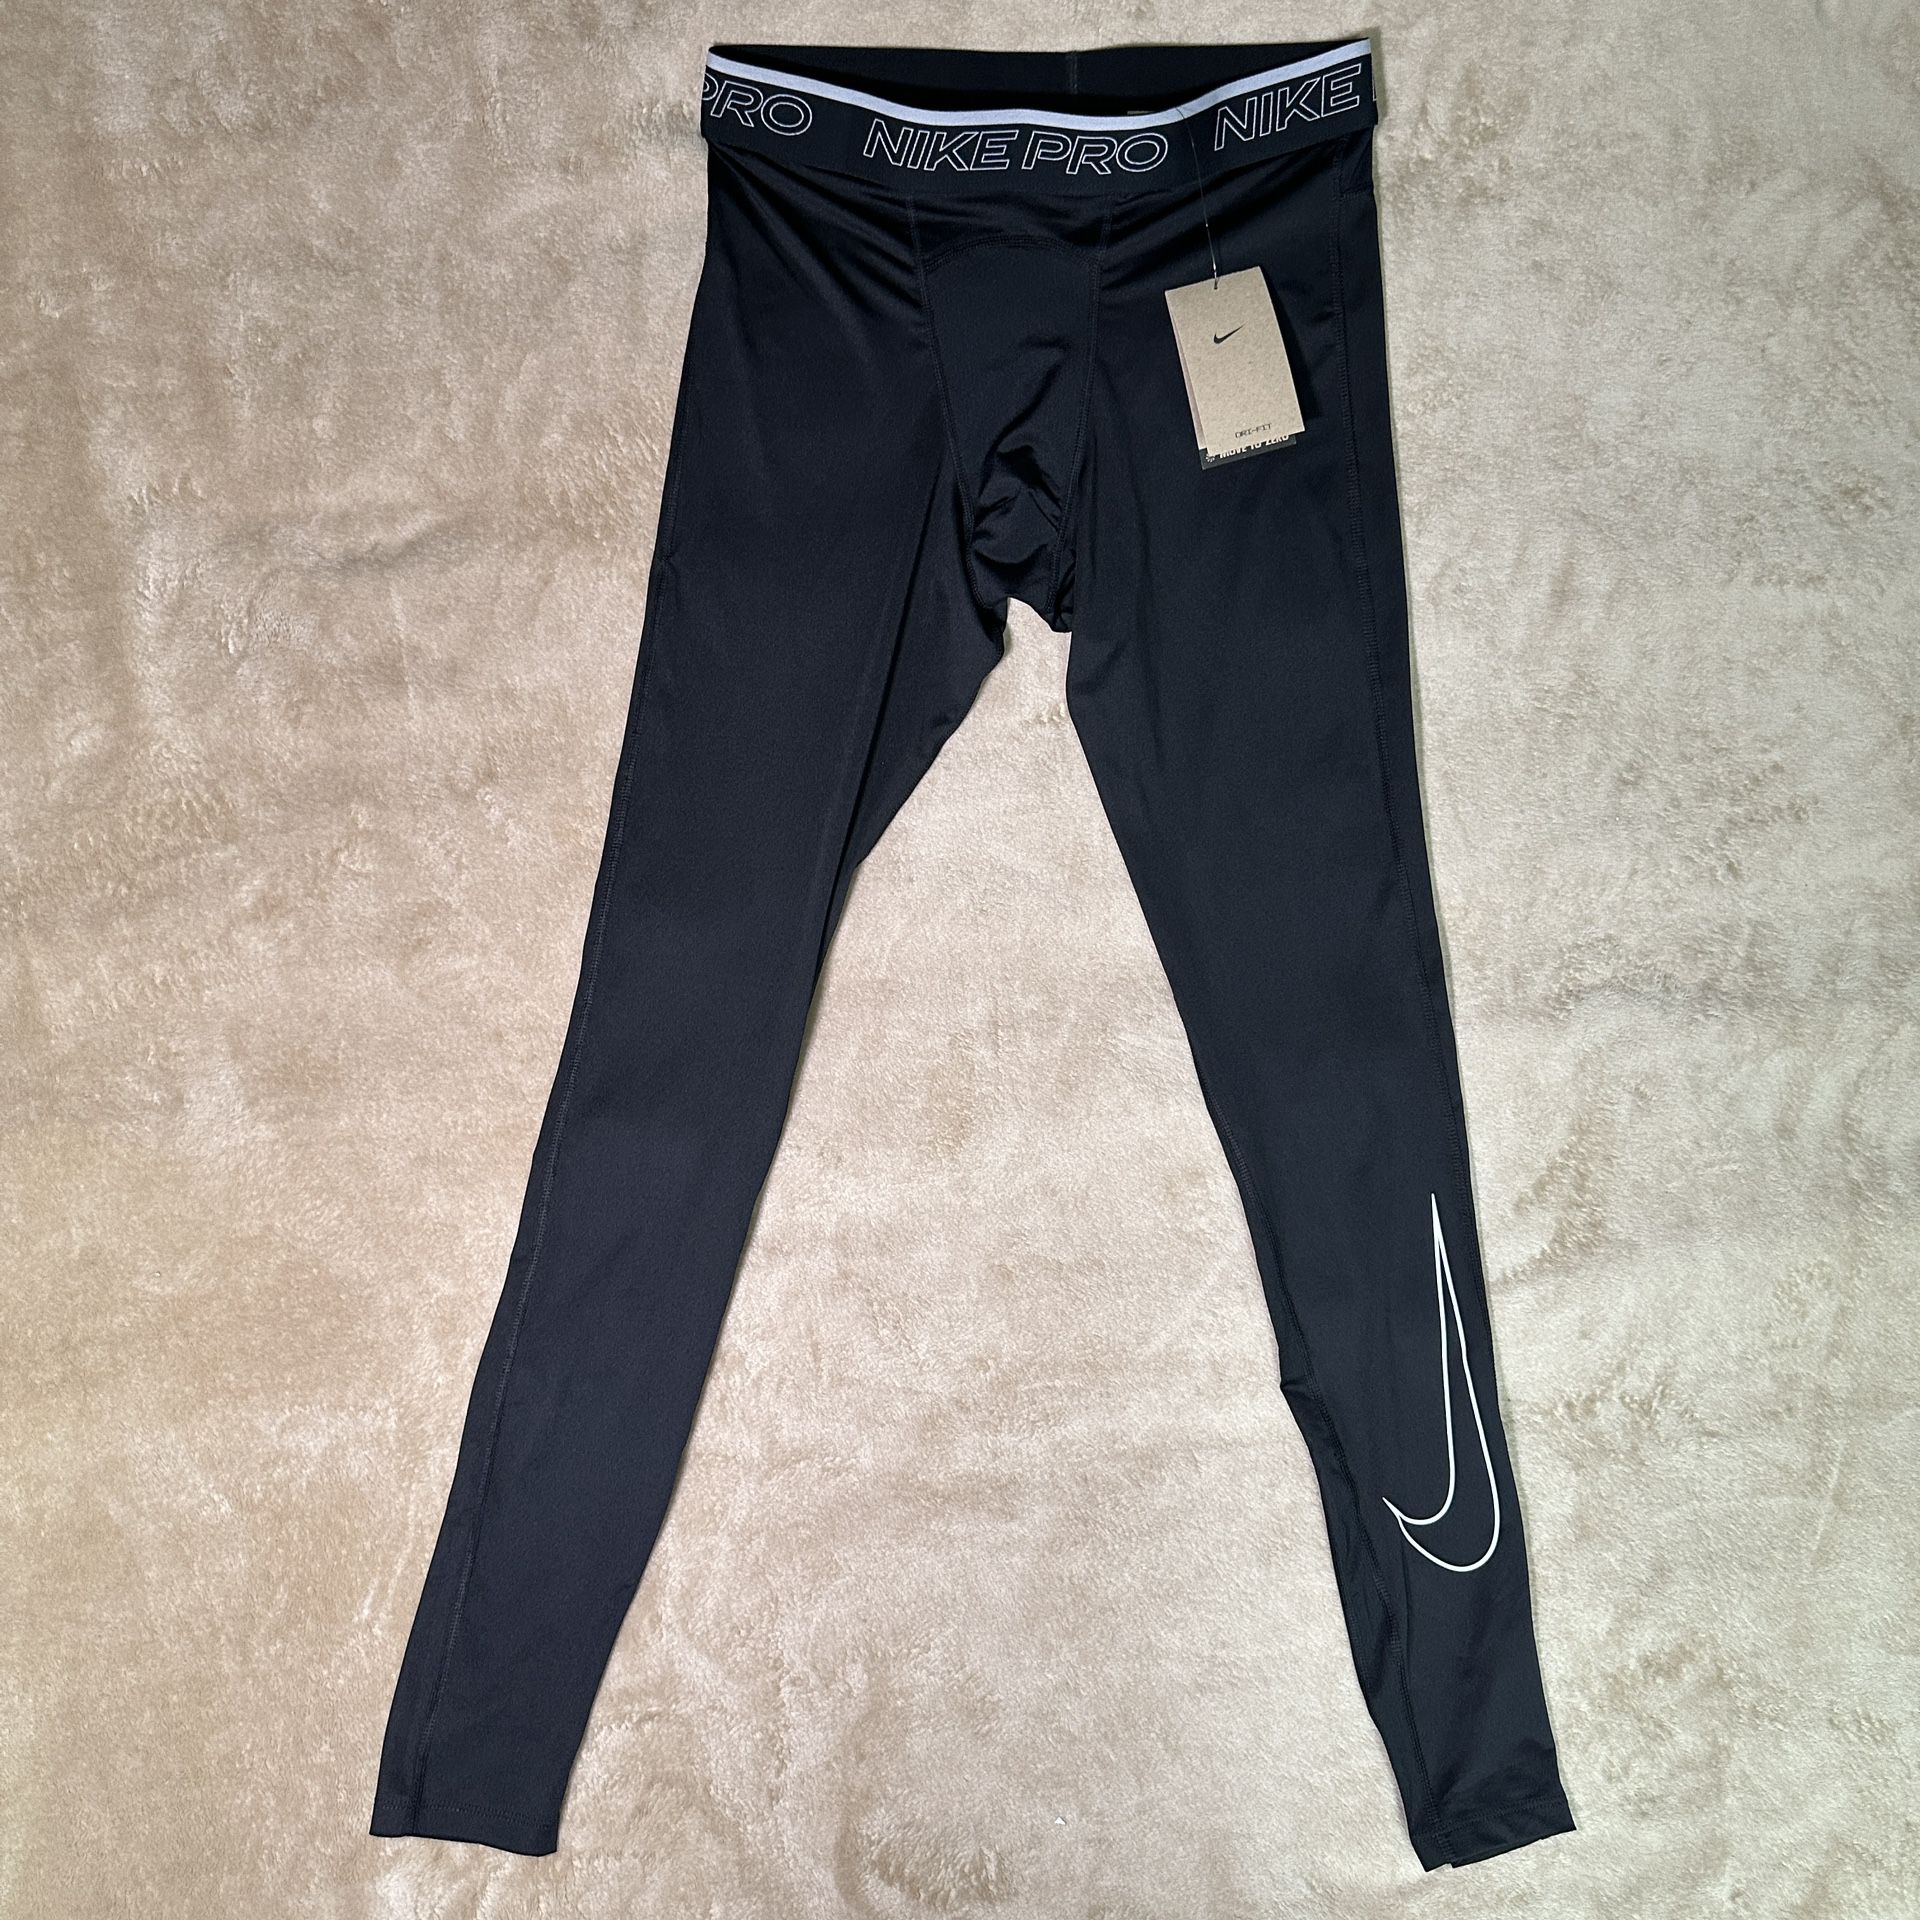 Nike Pants Adult Large Black Pro Dri-Fit Tight Fit Solid Comfort Casual Gym Mens